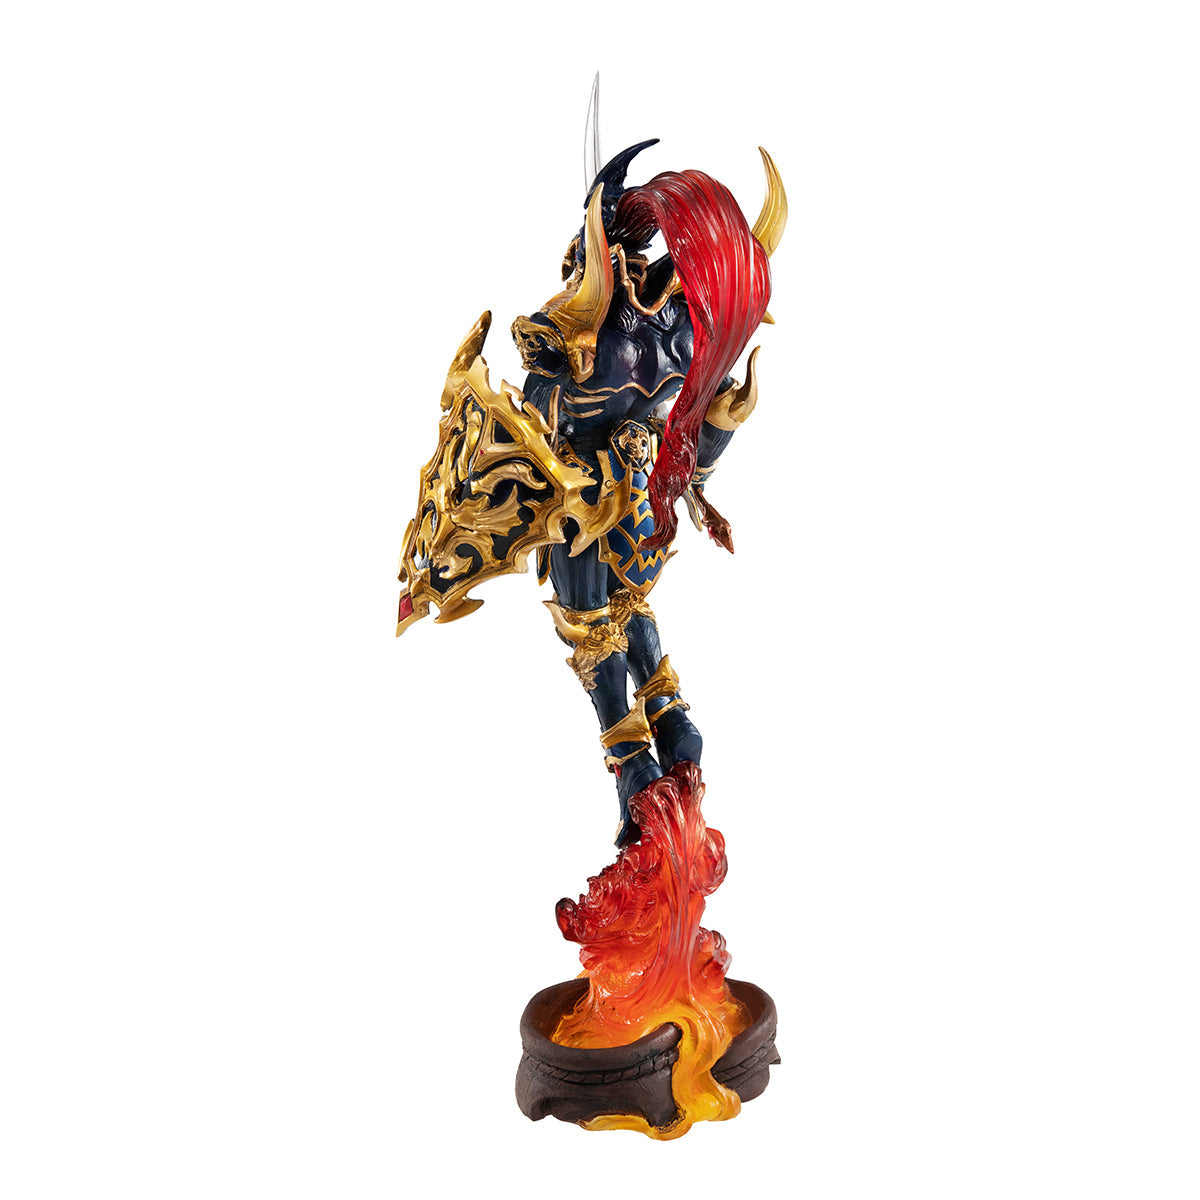 Yu-Gi-Oh! Duel Monsters - Chaos Soldier - Art Works Monsters (MegaHouse), Franchise: Yu-Gi-Oh! Duel Monsters, Brand: MegaHouse, Release Date: 31. Jul 2020, Type: General, Nippon Figures